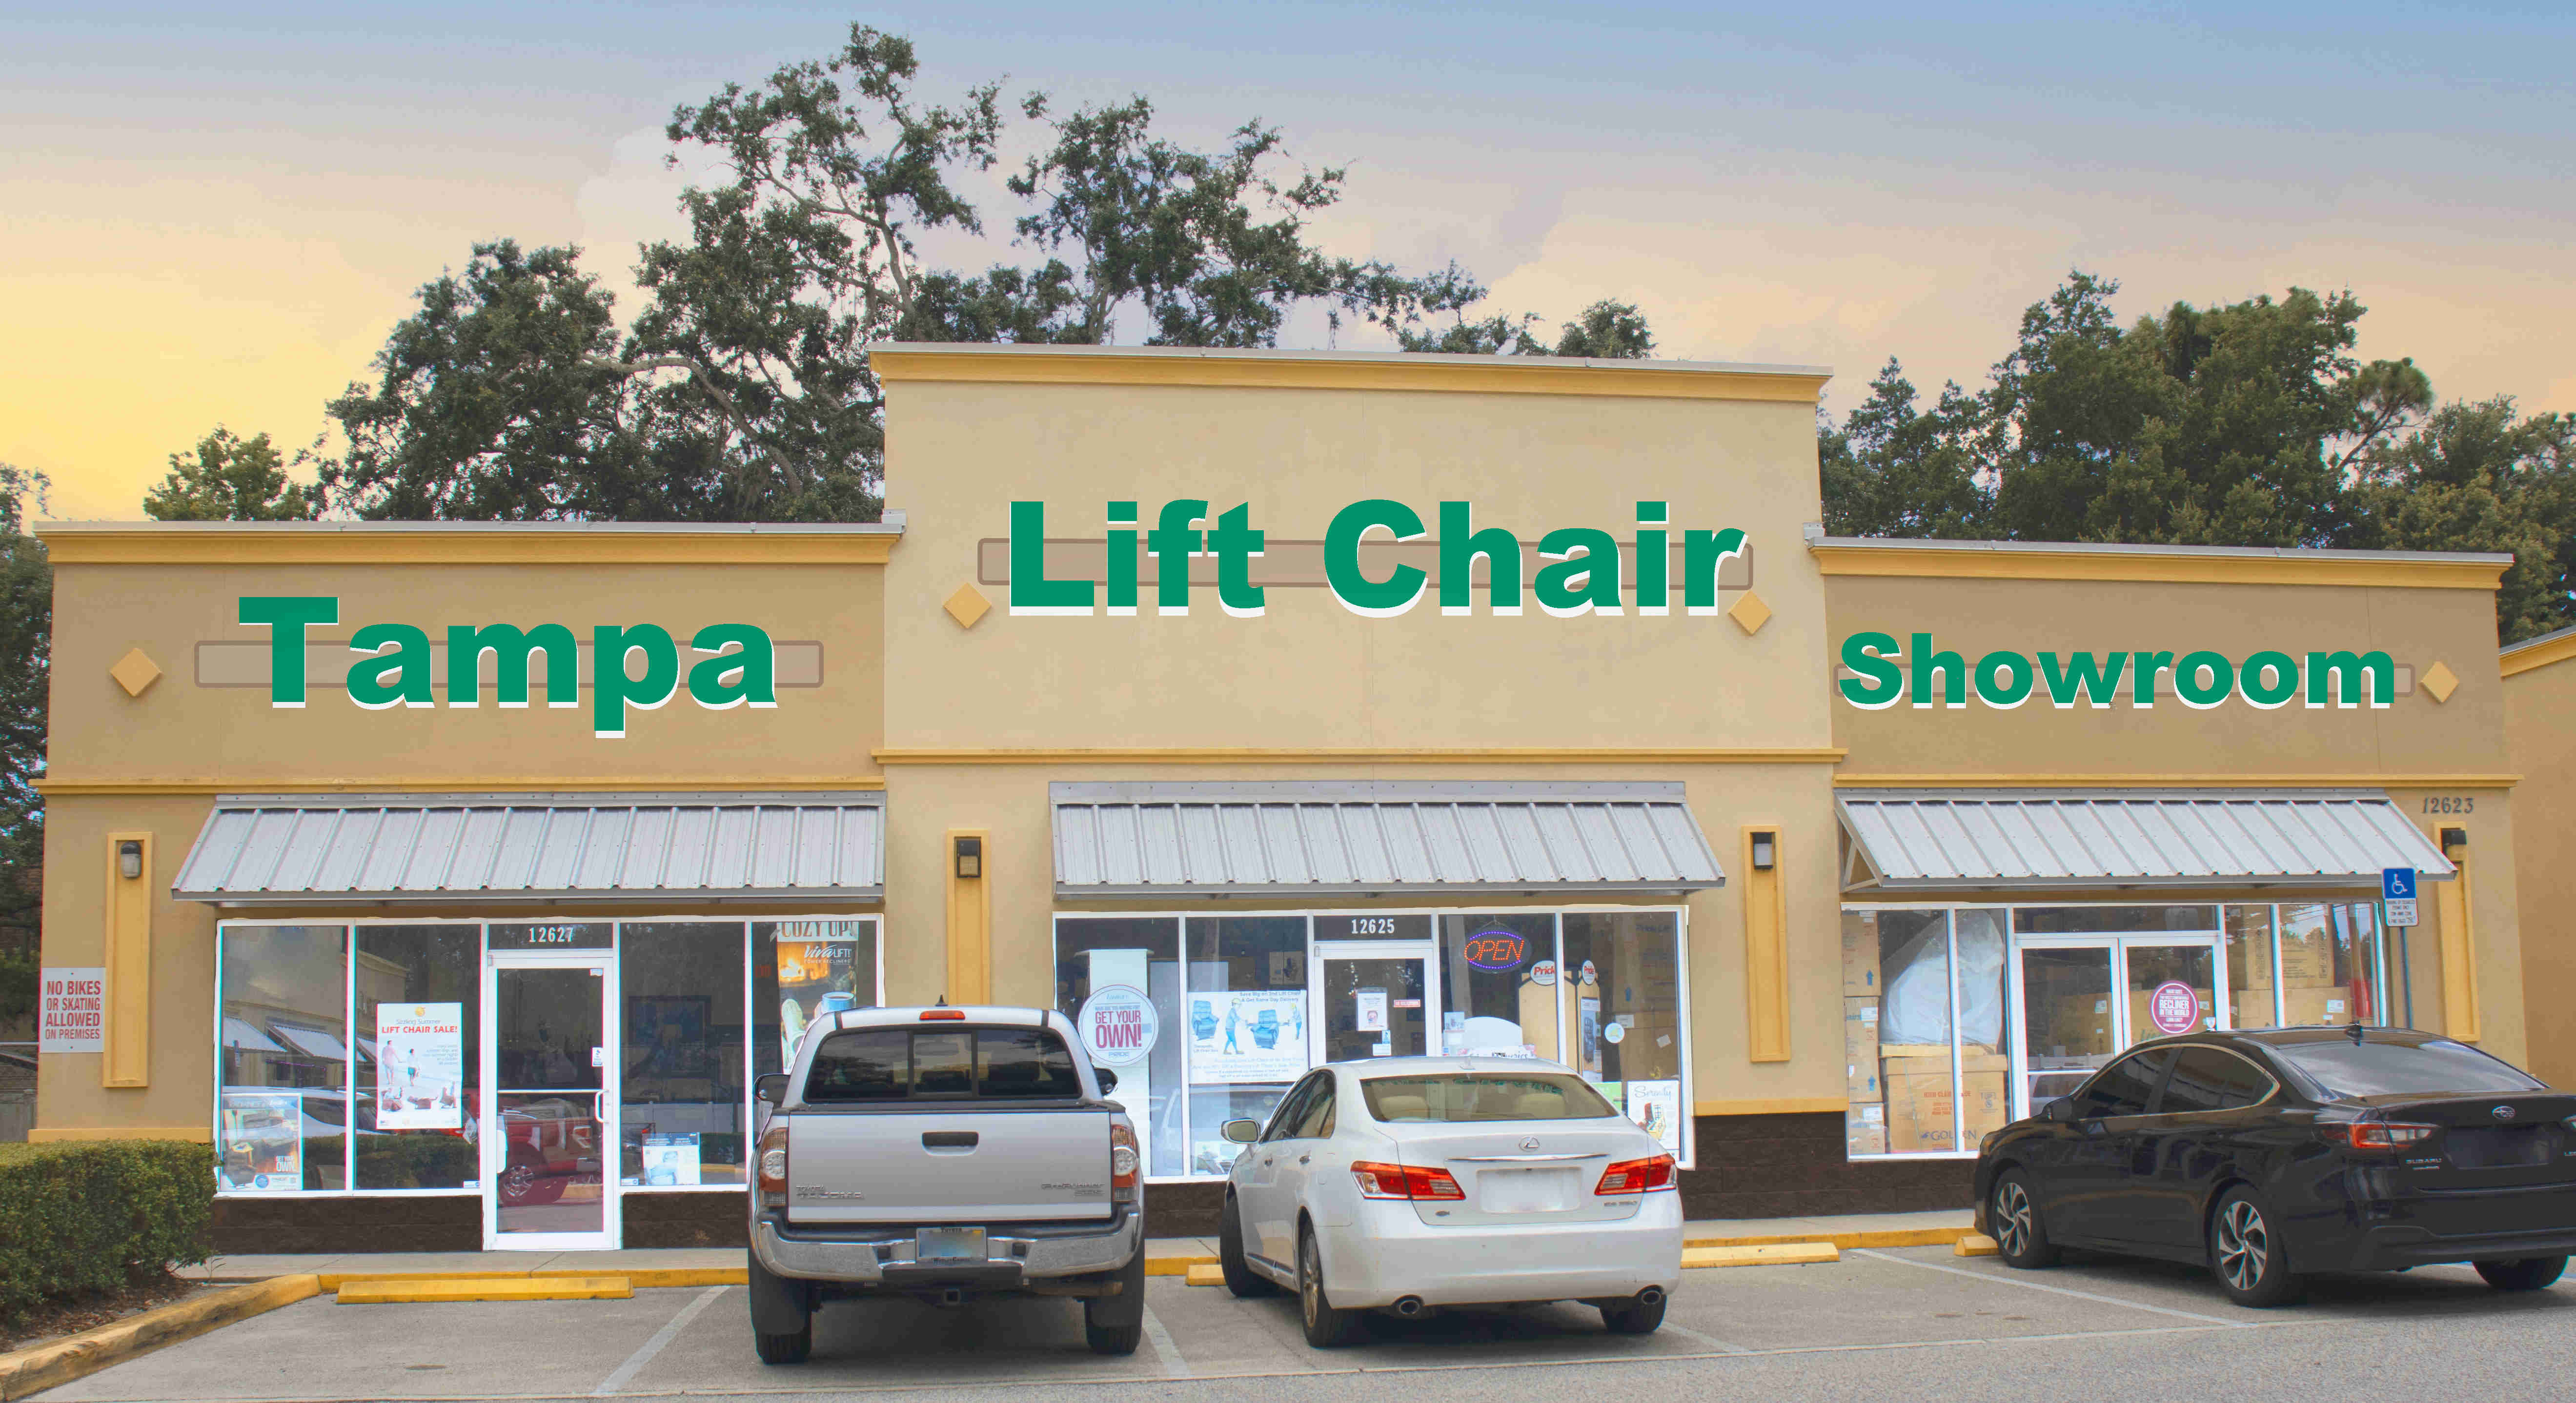 The store front of the Tampa Lift Chair Showroom.